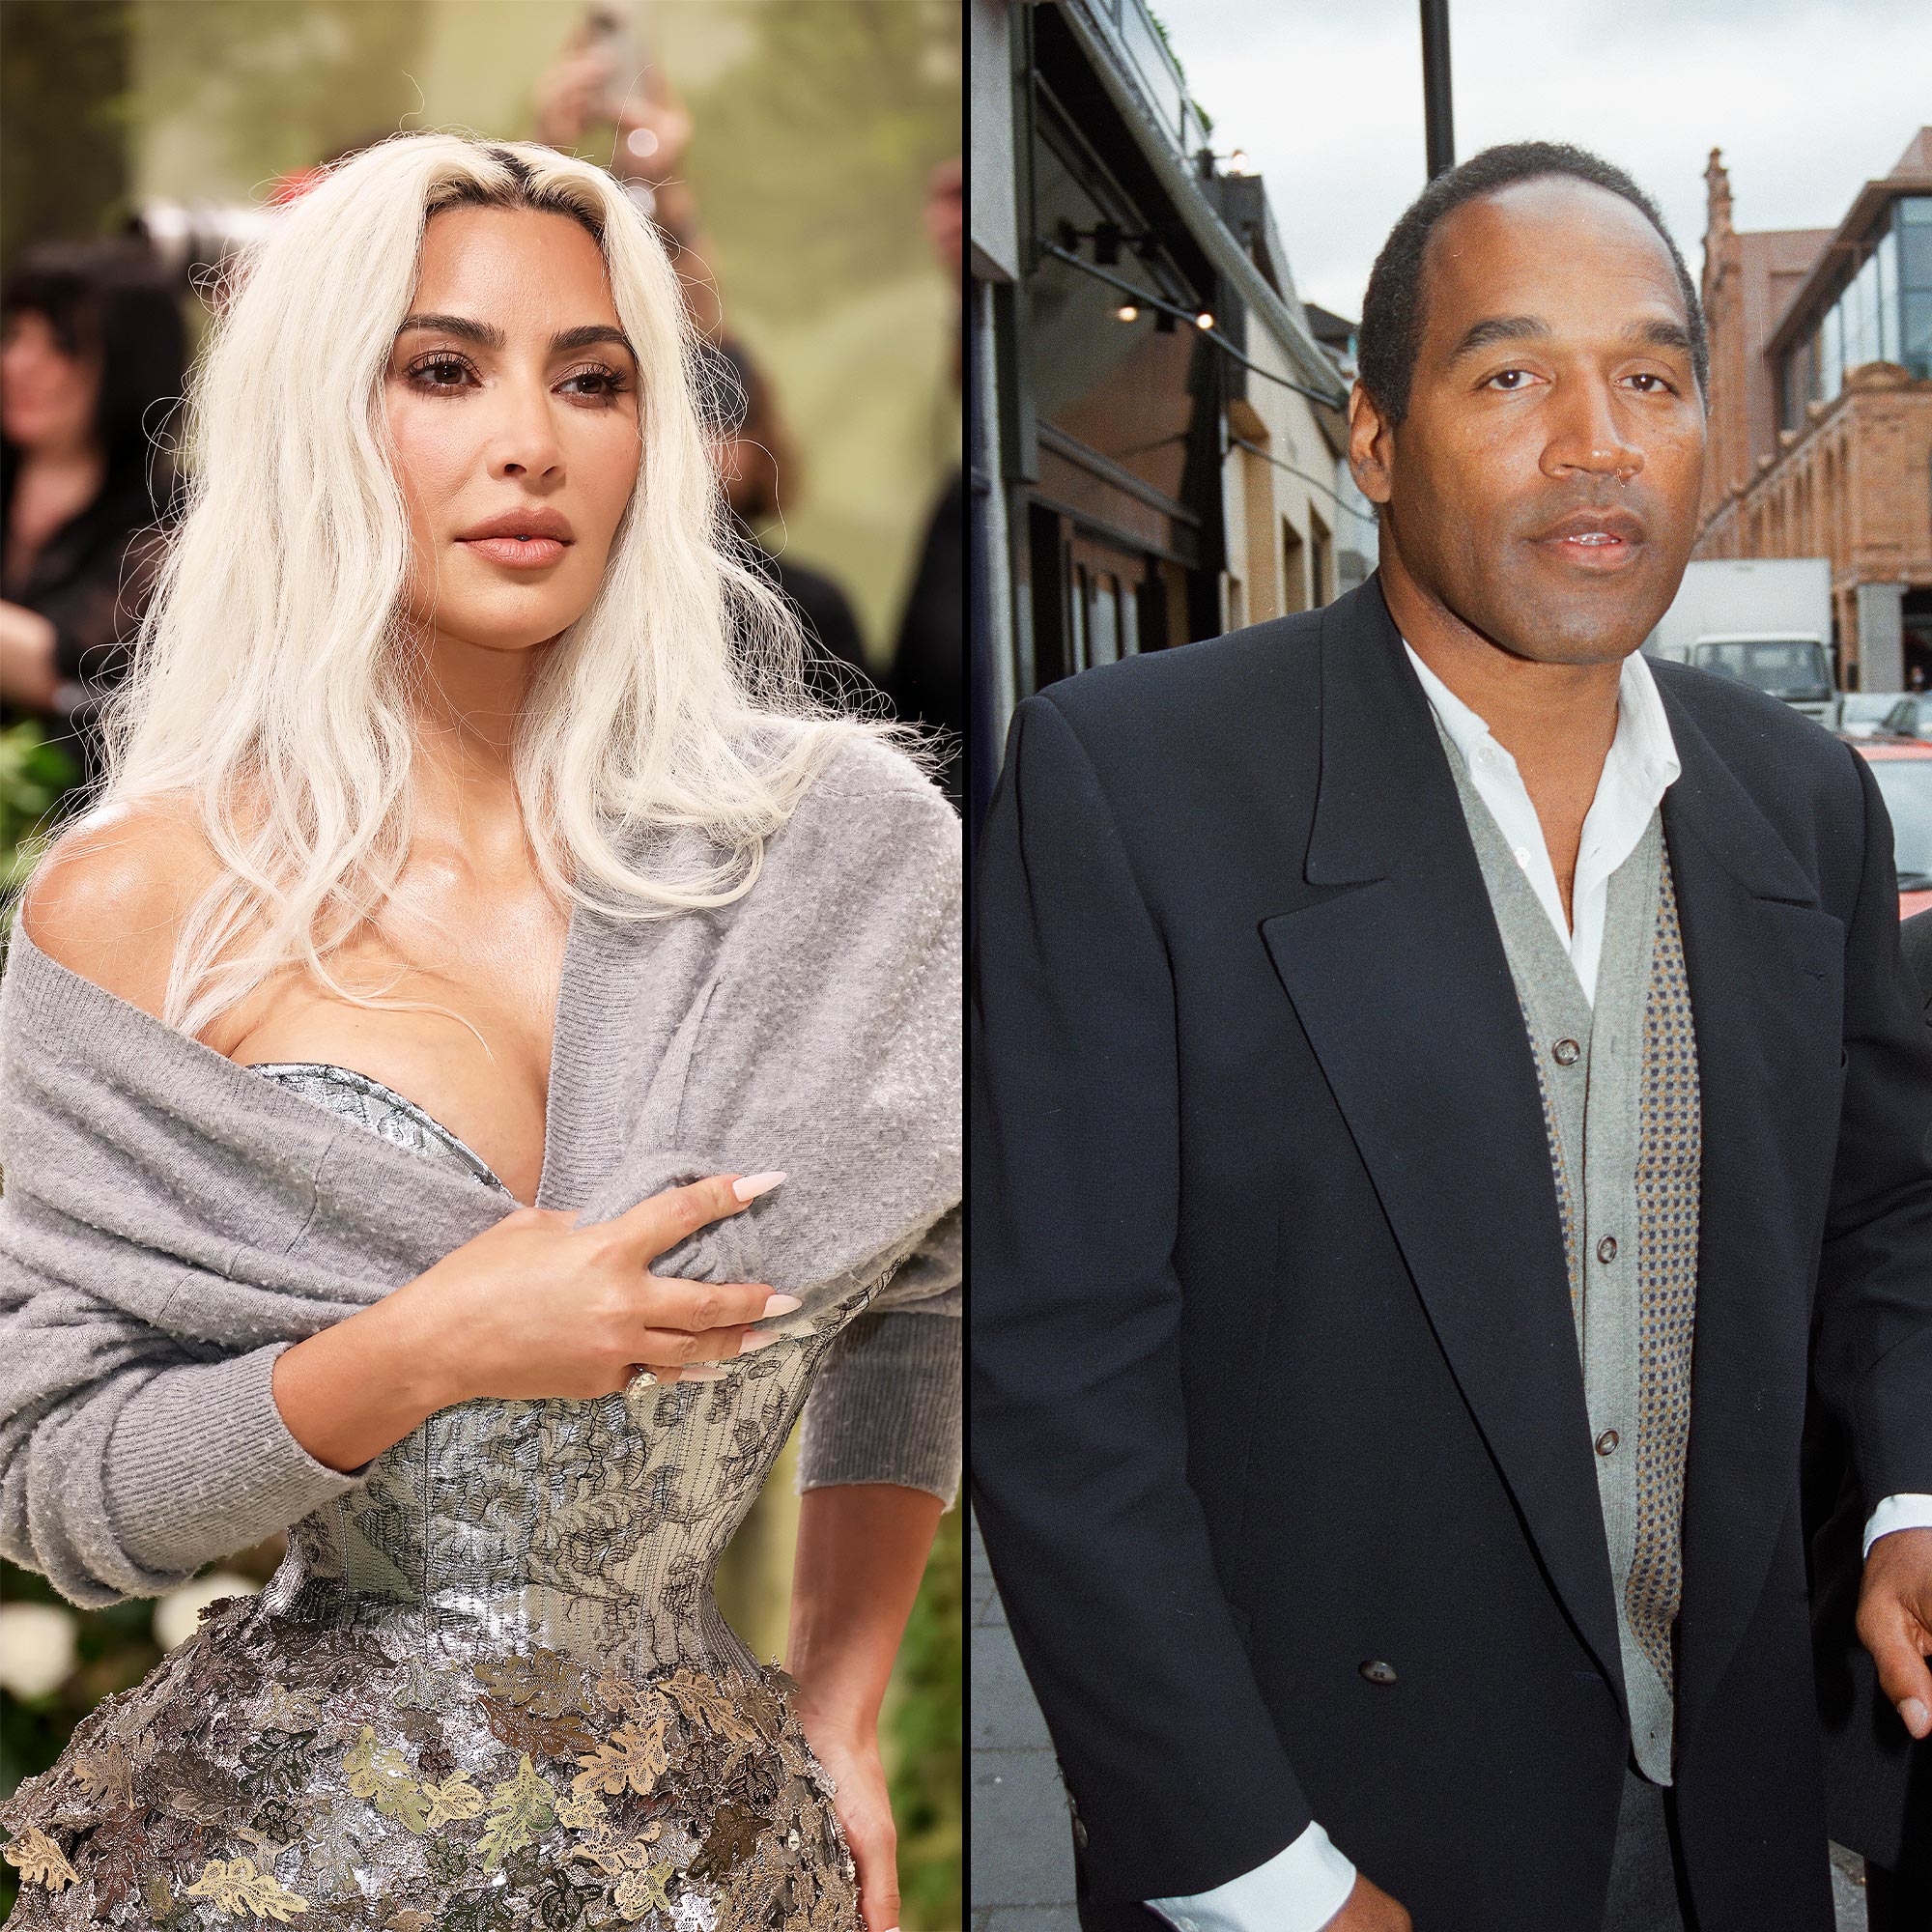 Kim Kardashian Wonders If O.J. Simpson Connection Gets Her Out of Jury Duty